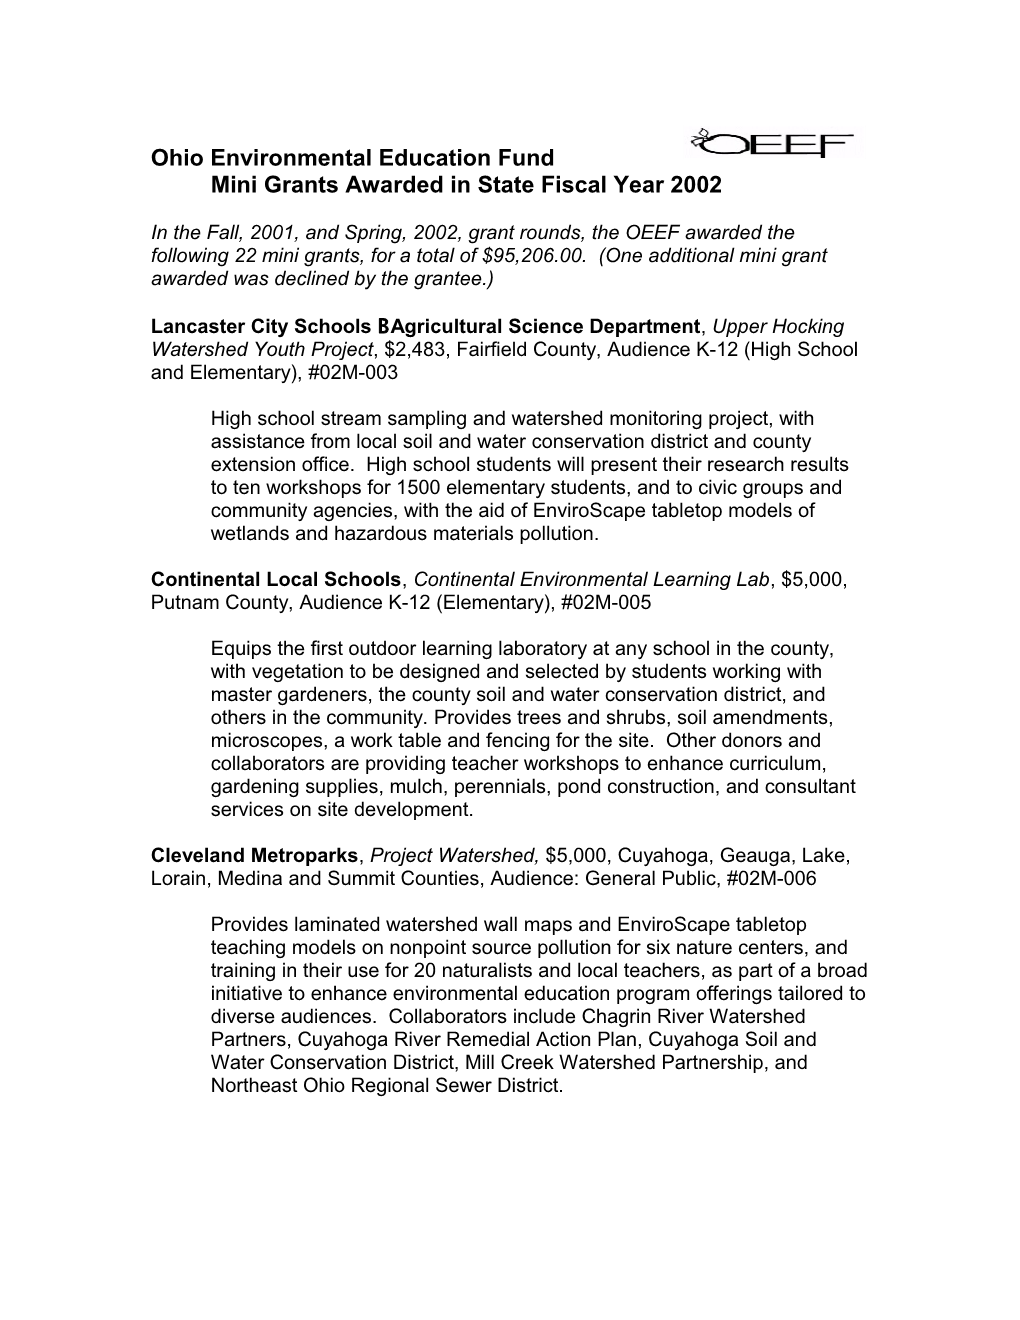 Ohio Environmental Education Fund Mini Grants Awarded in State Fiscal Year 2002